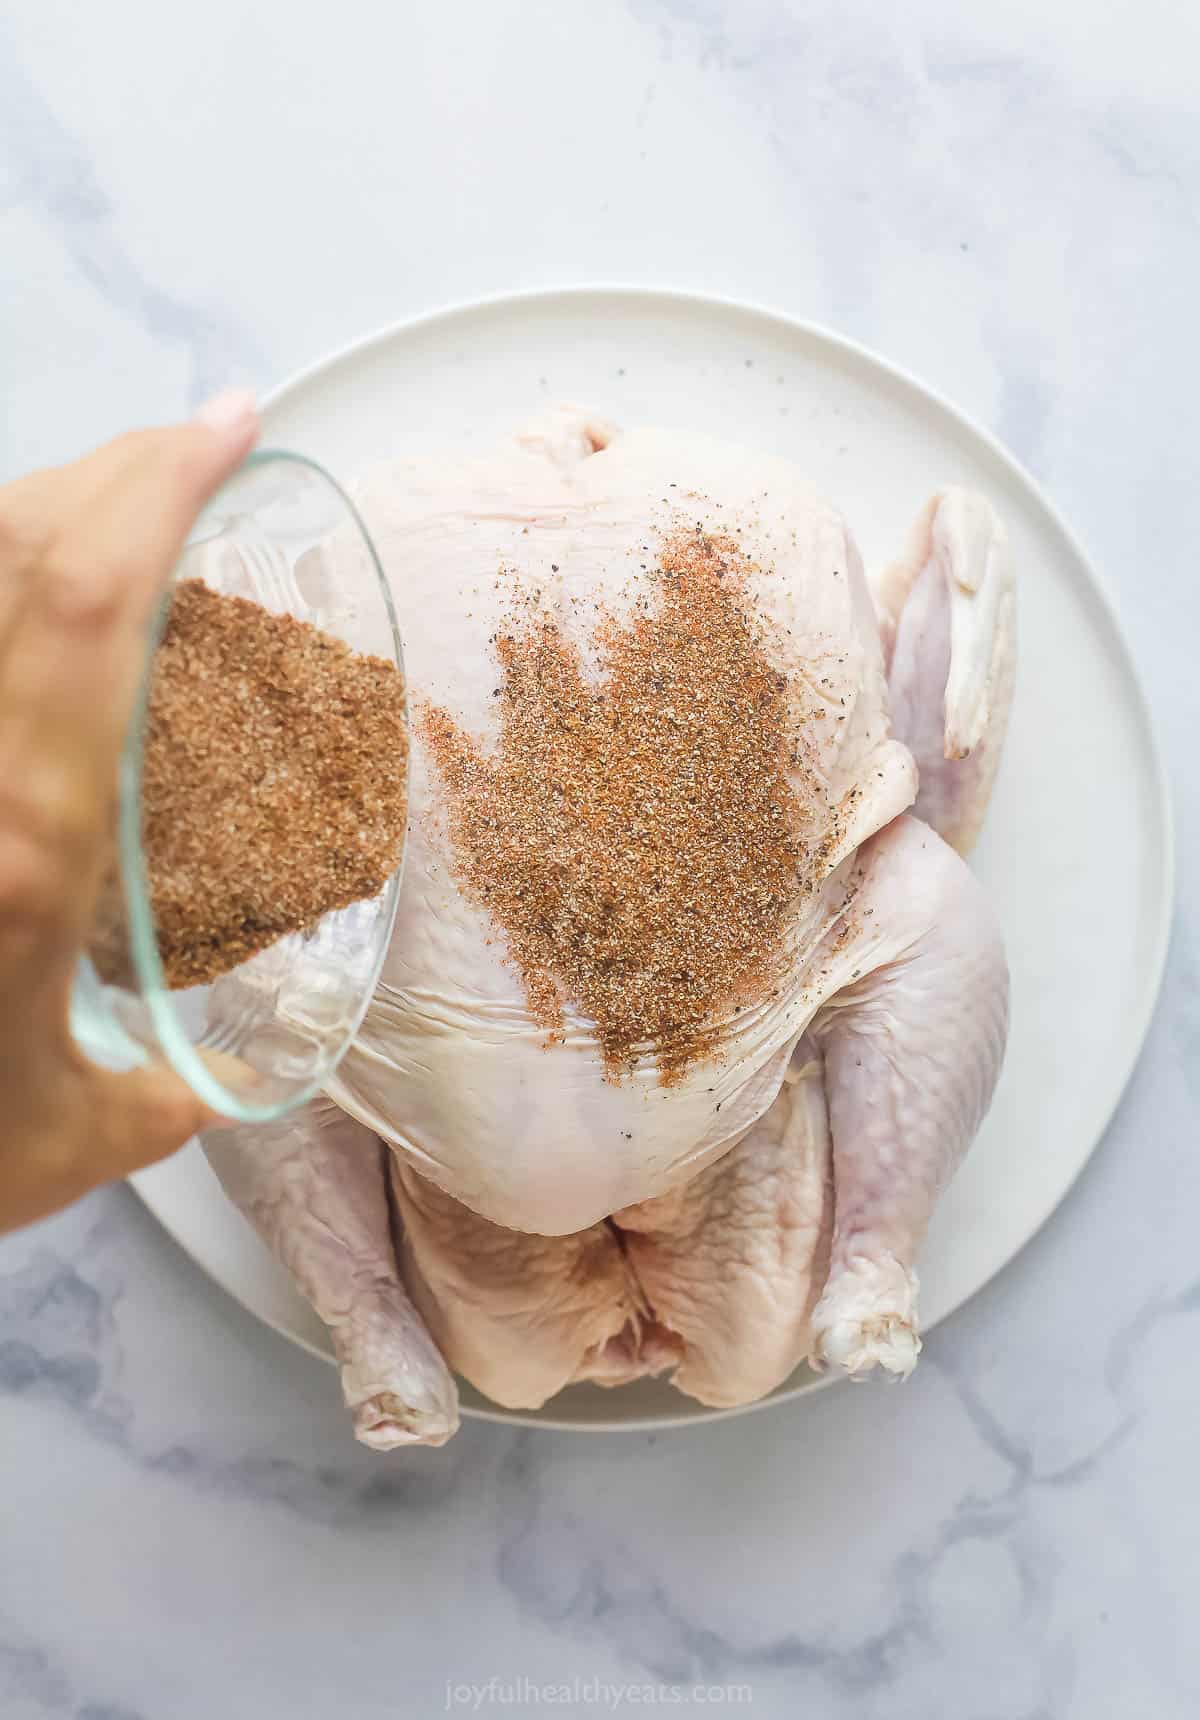 a person pouring dried seasonings onto a whole chicken